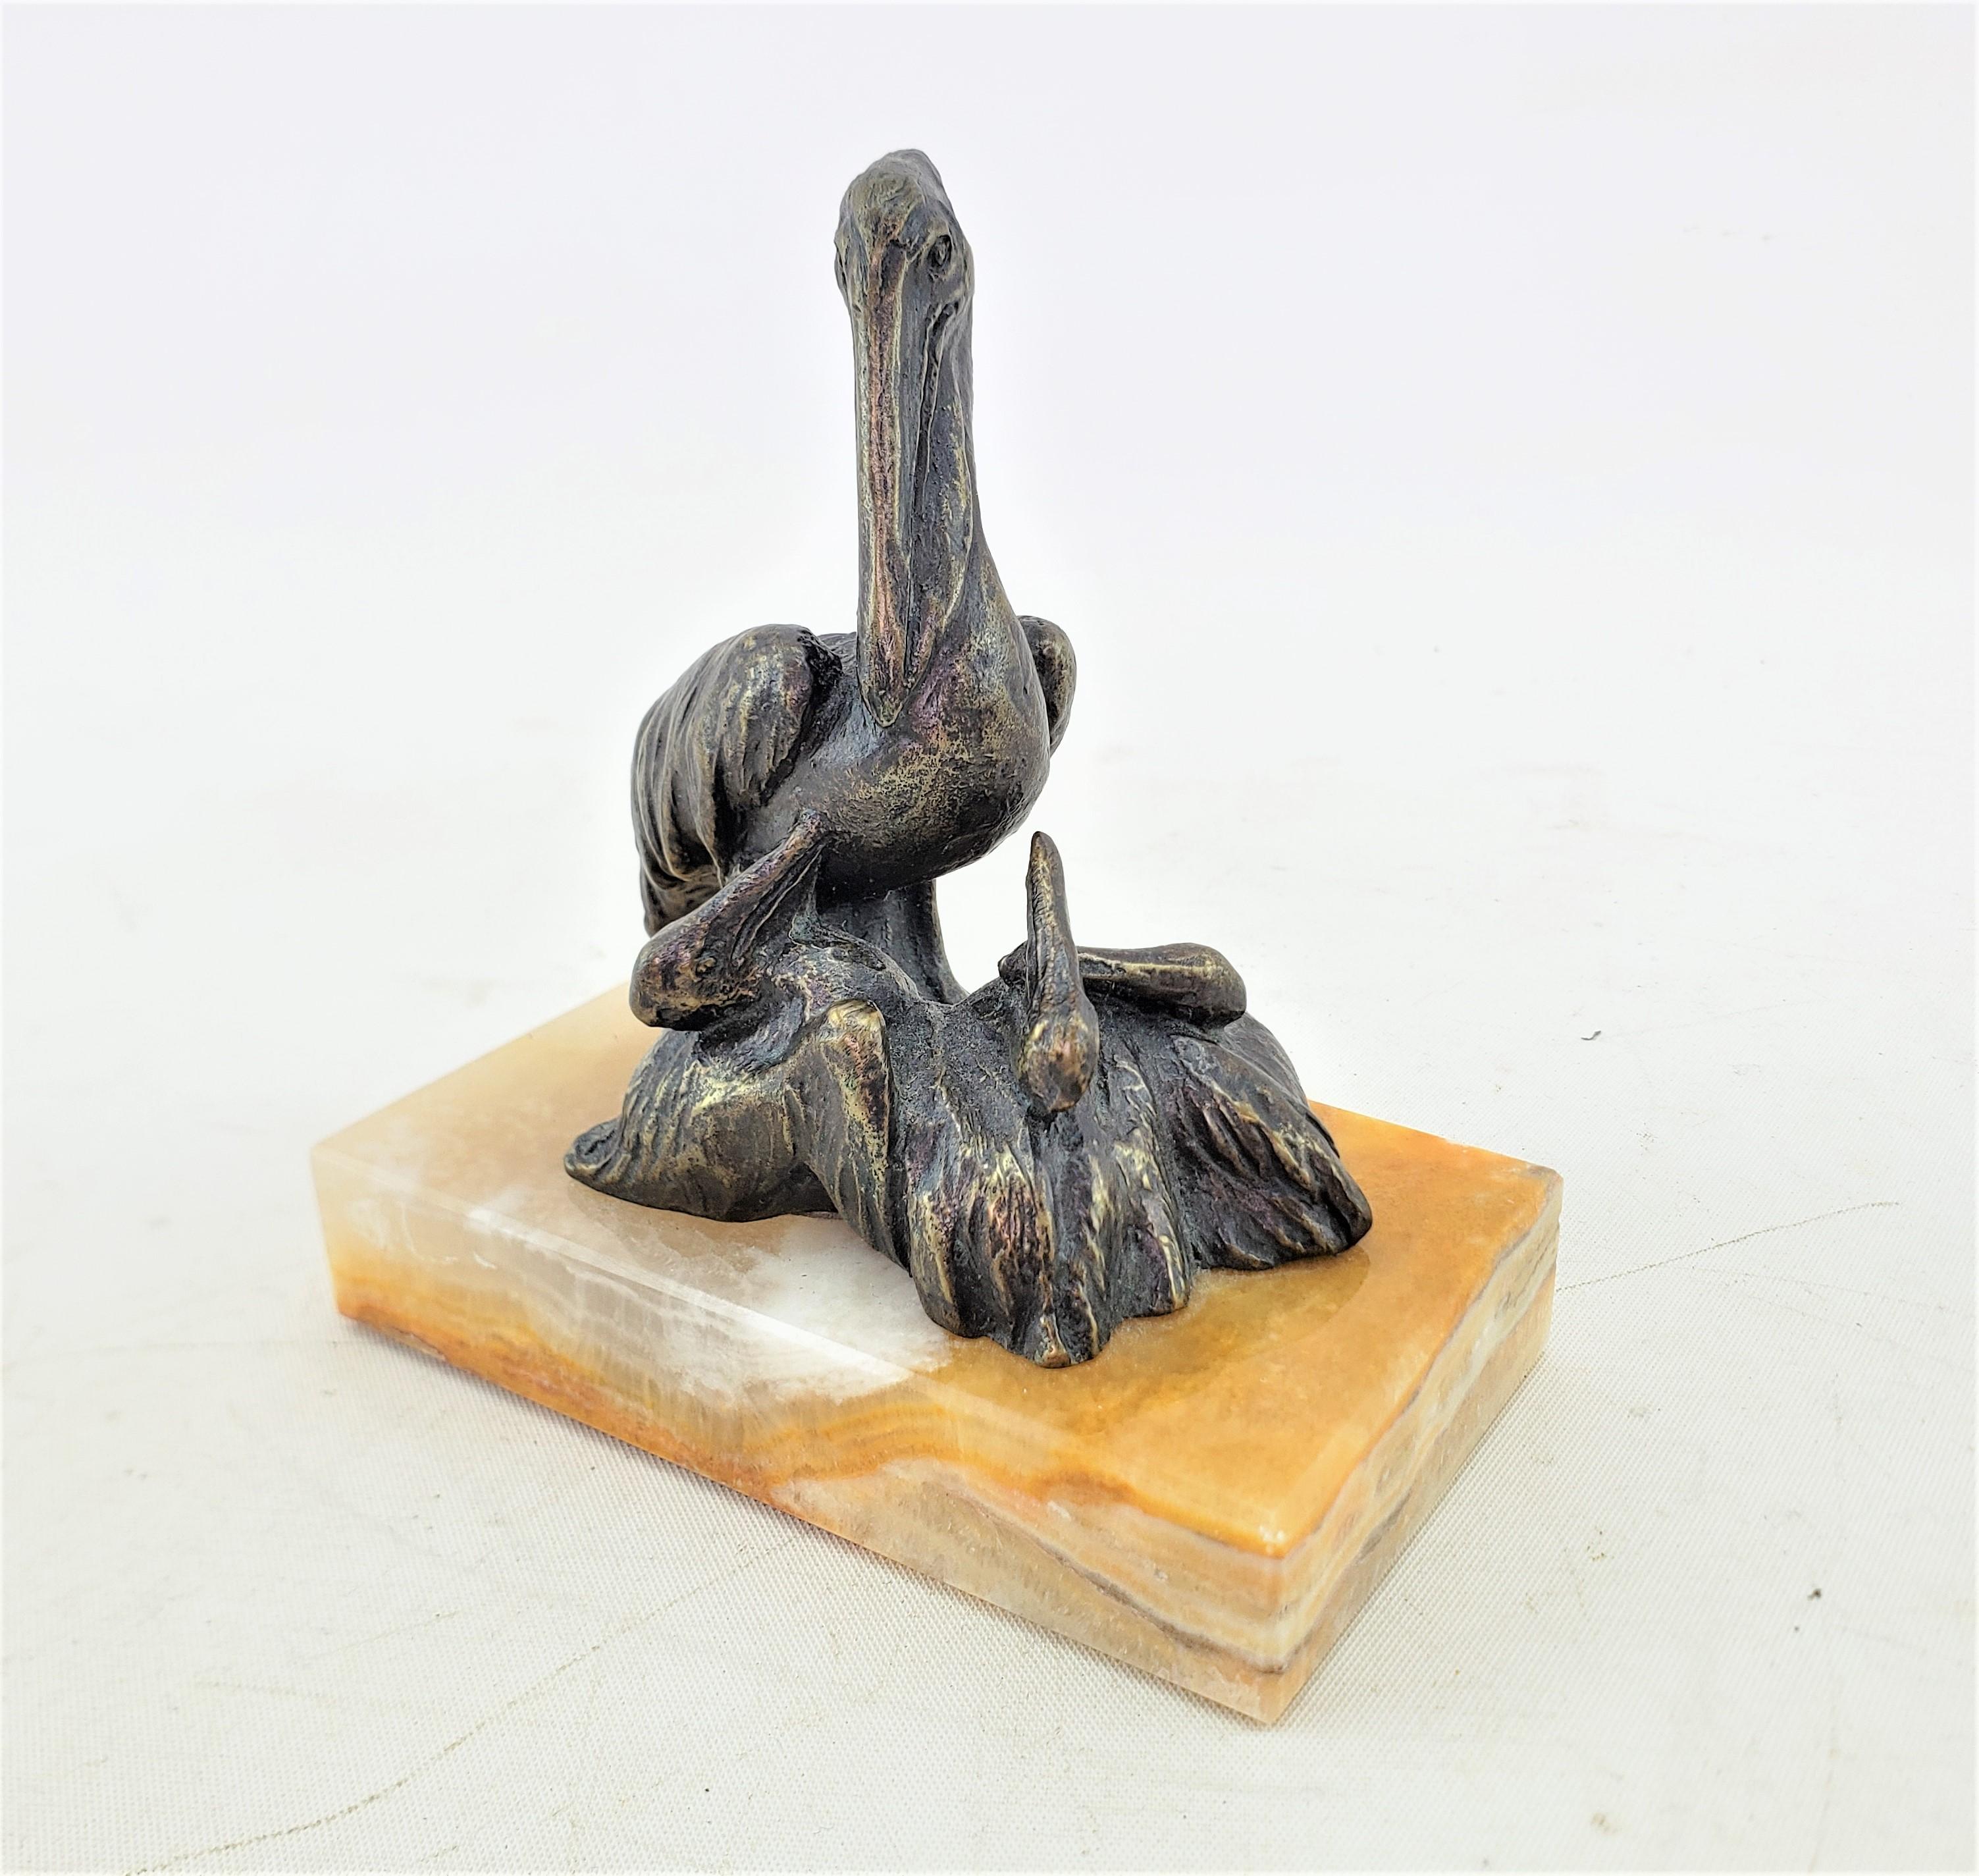 This small well executed sculpture is signed by an unknown artist and presumed to date to approximately 1920 and done in the period Art Deco style. The sculpture is composed of cast and patinated brass and depicts a pelican standing on a rocky